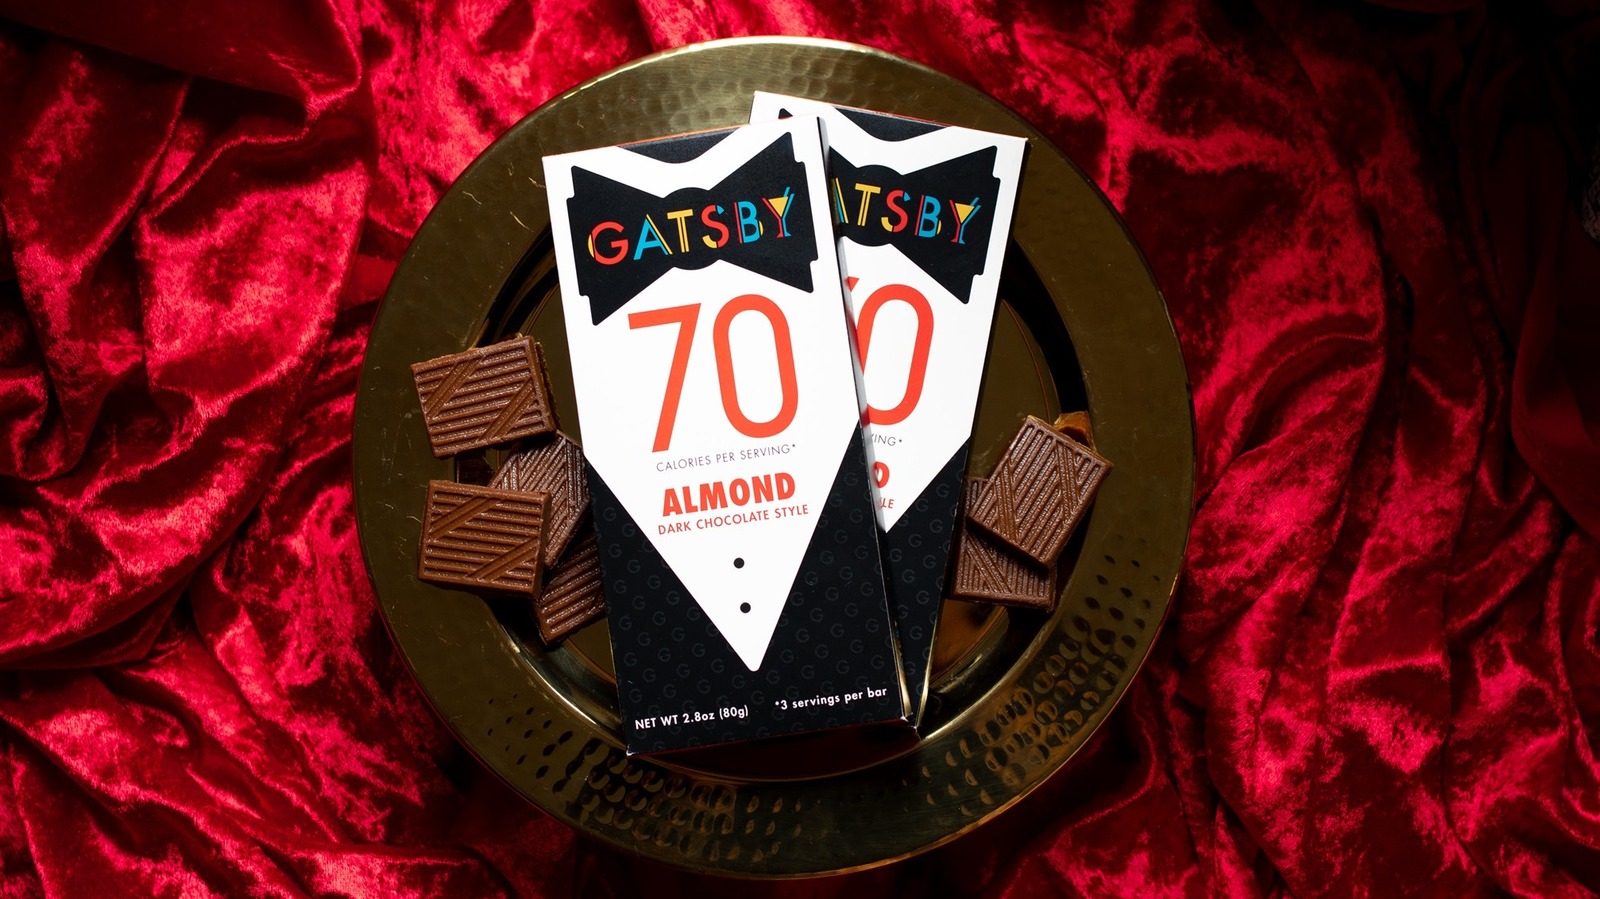 https://www.foodrepublic.com/img/gallery/what-shark-tank-didnt-tell-you-about-gatsby-chocolate/l-intro-1695813079.jpg